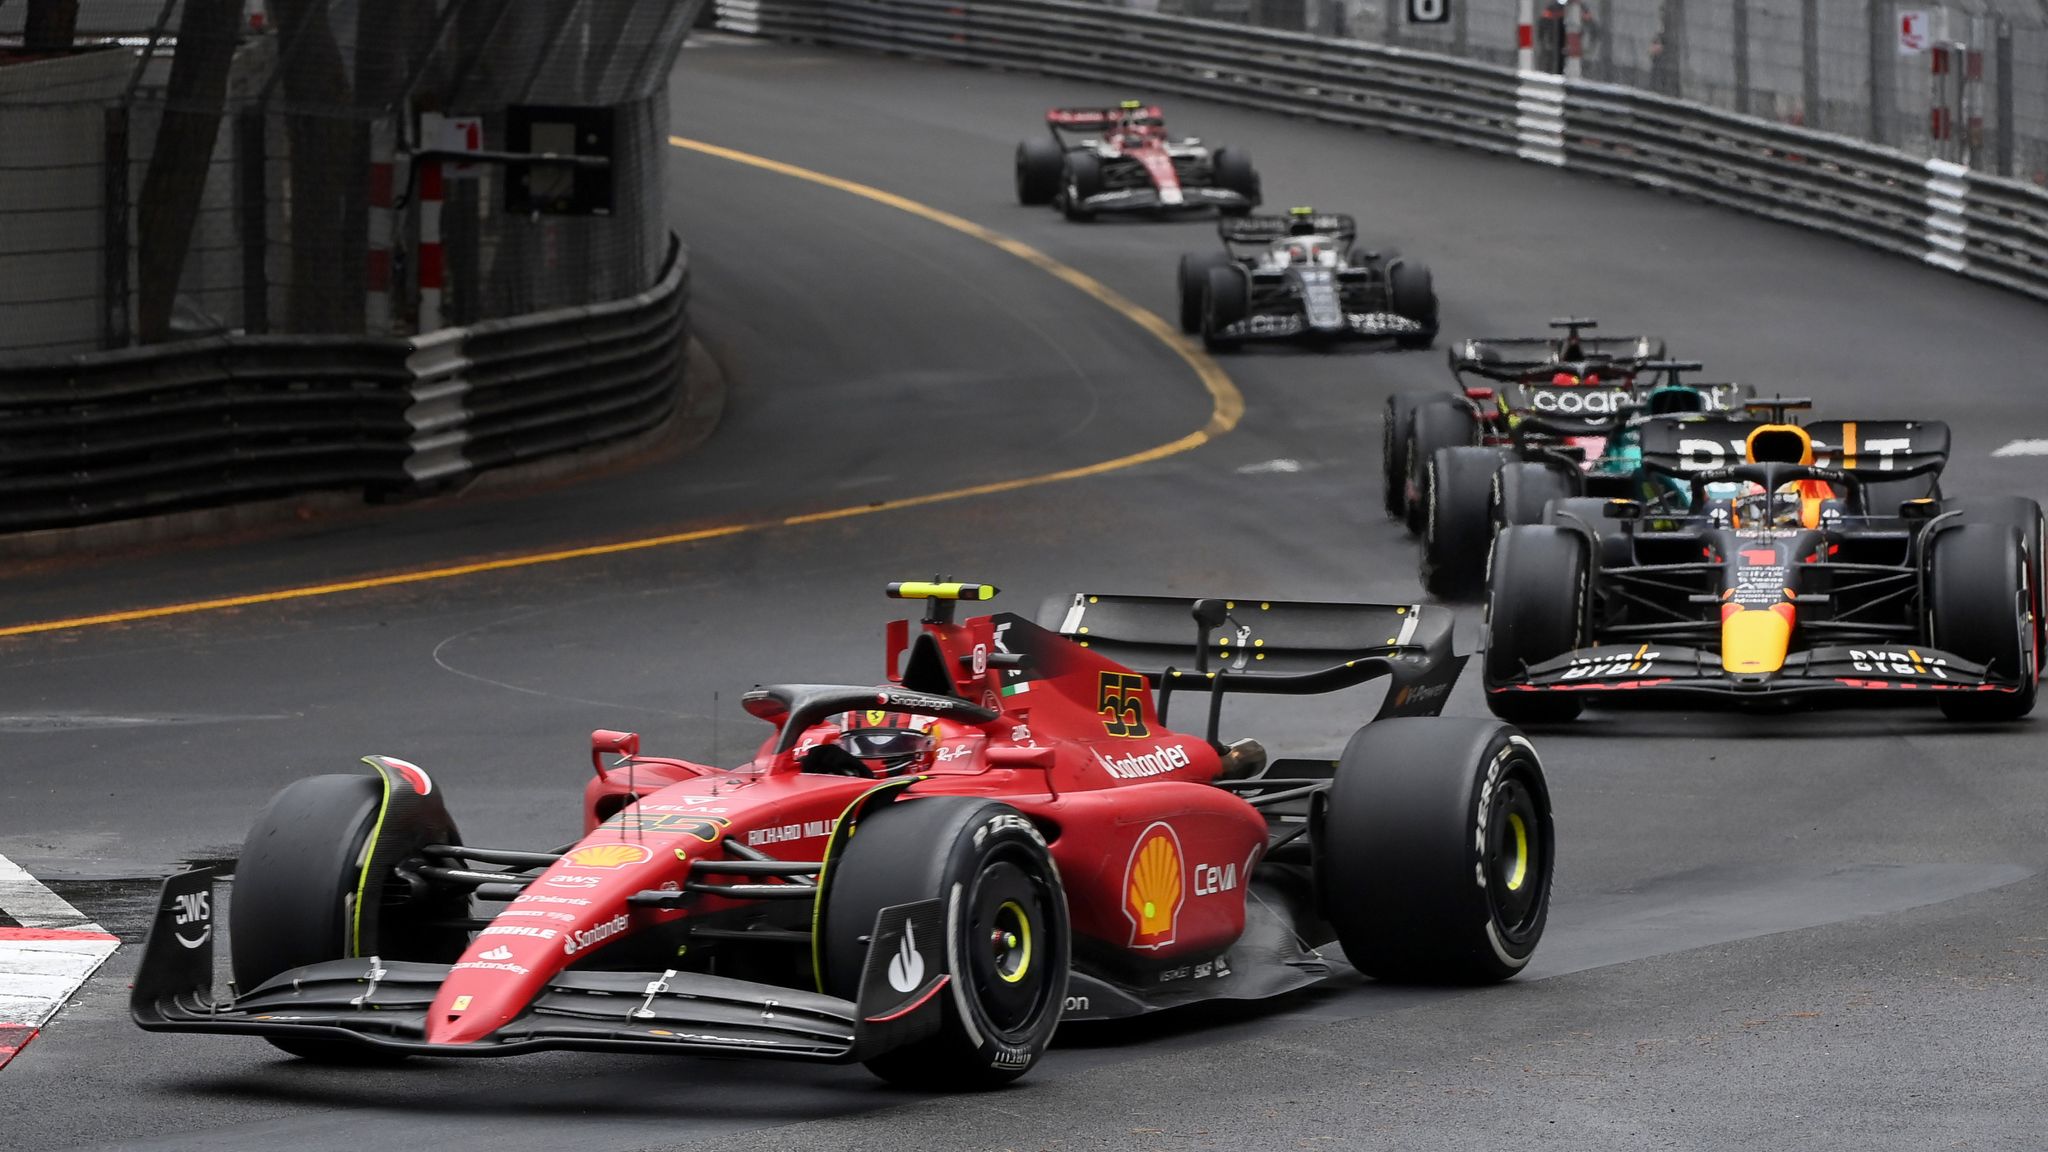 Awesome Photos From the Formula One Monaco Grand Prix